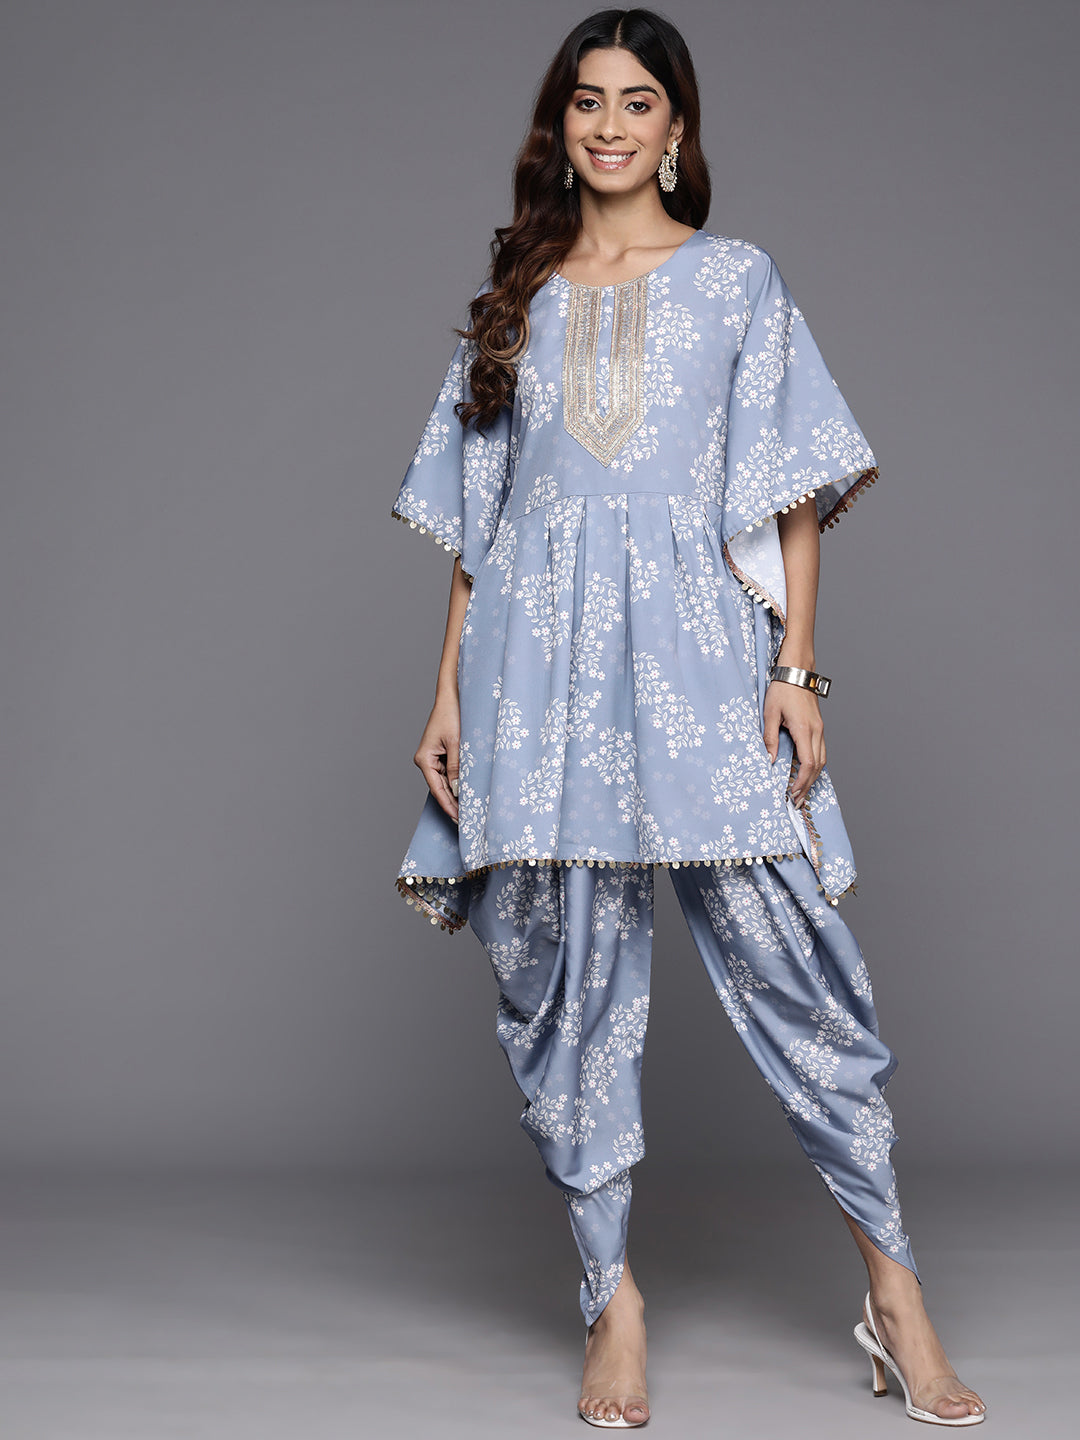 Sangria - By Myntra Women Ethnic Motifs Round Neck Kurta Set For Women  Viscose Rayon Party Wear Draped Luxe Short Sleeves Above Knee Pleated Kurti  with dhoti pants Set - Walmart.com